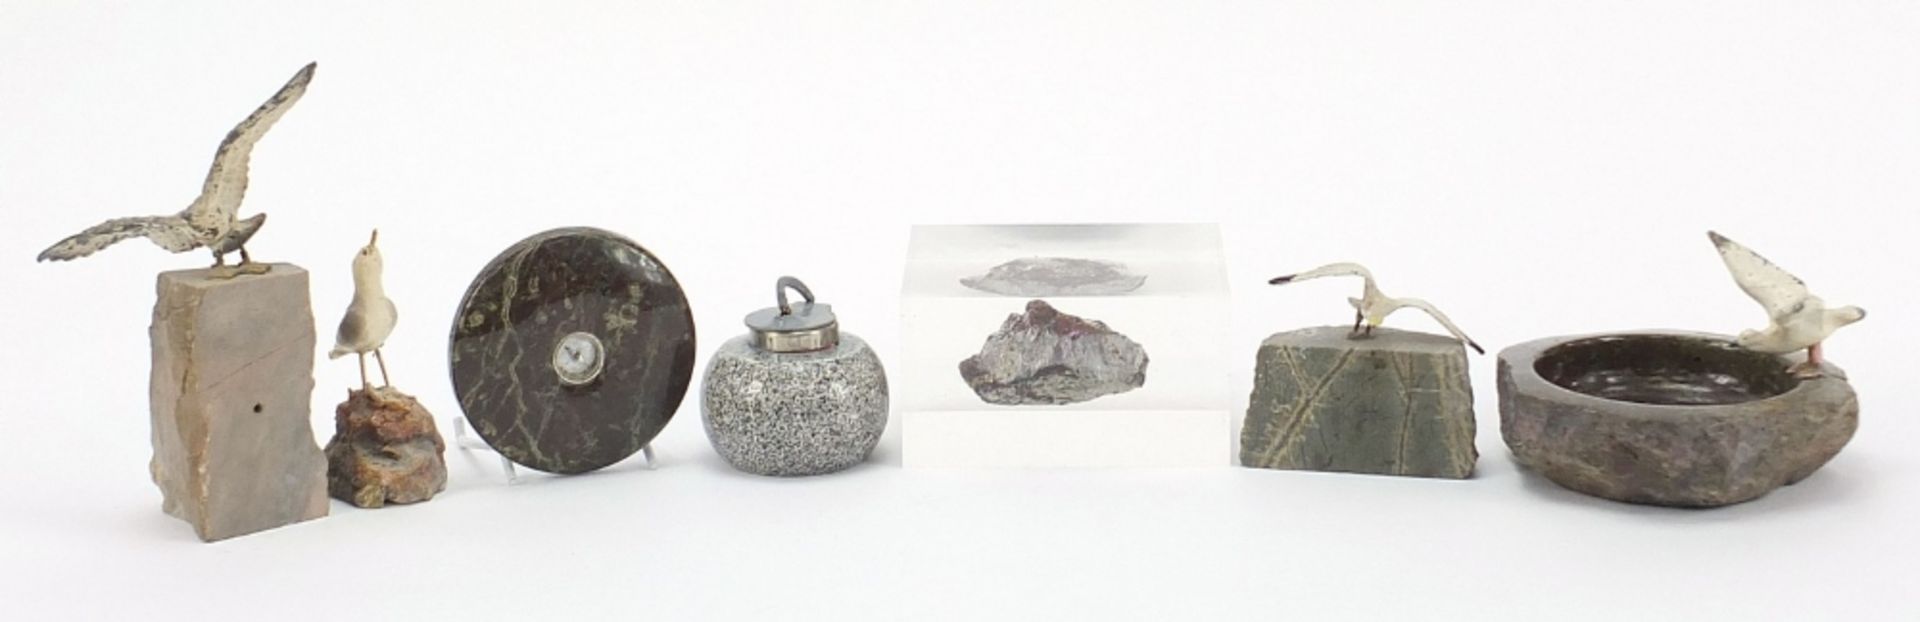 Rocks and hardstones including a serpentine marble compass design paperweight and cold painted